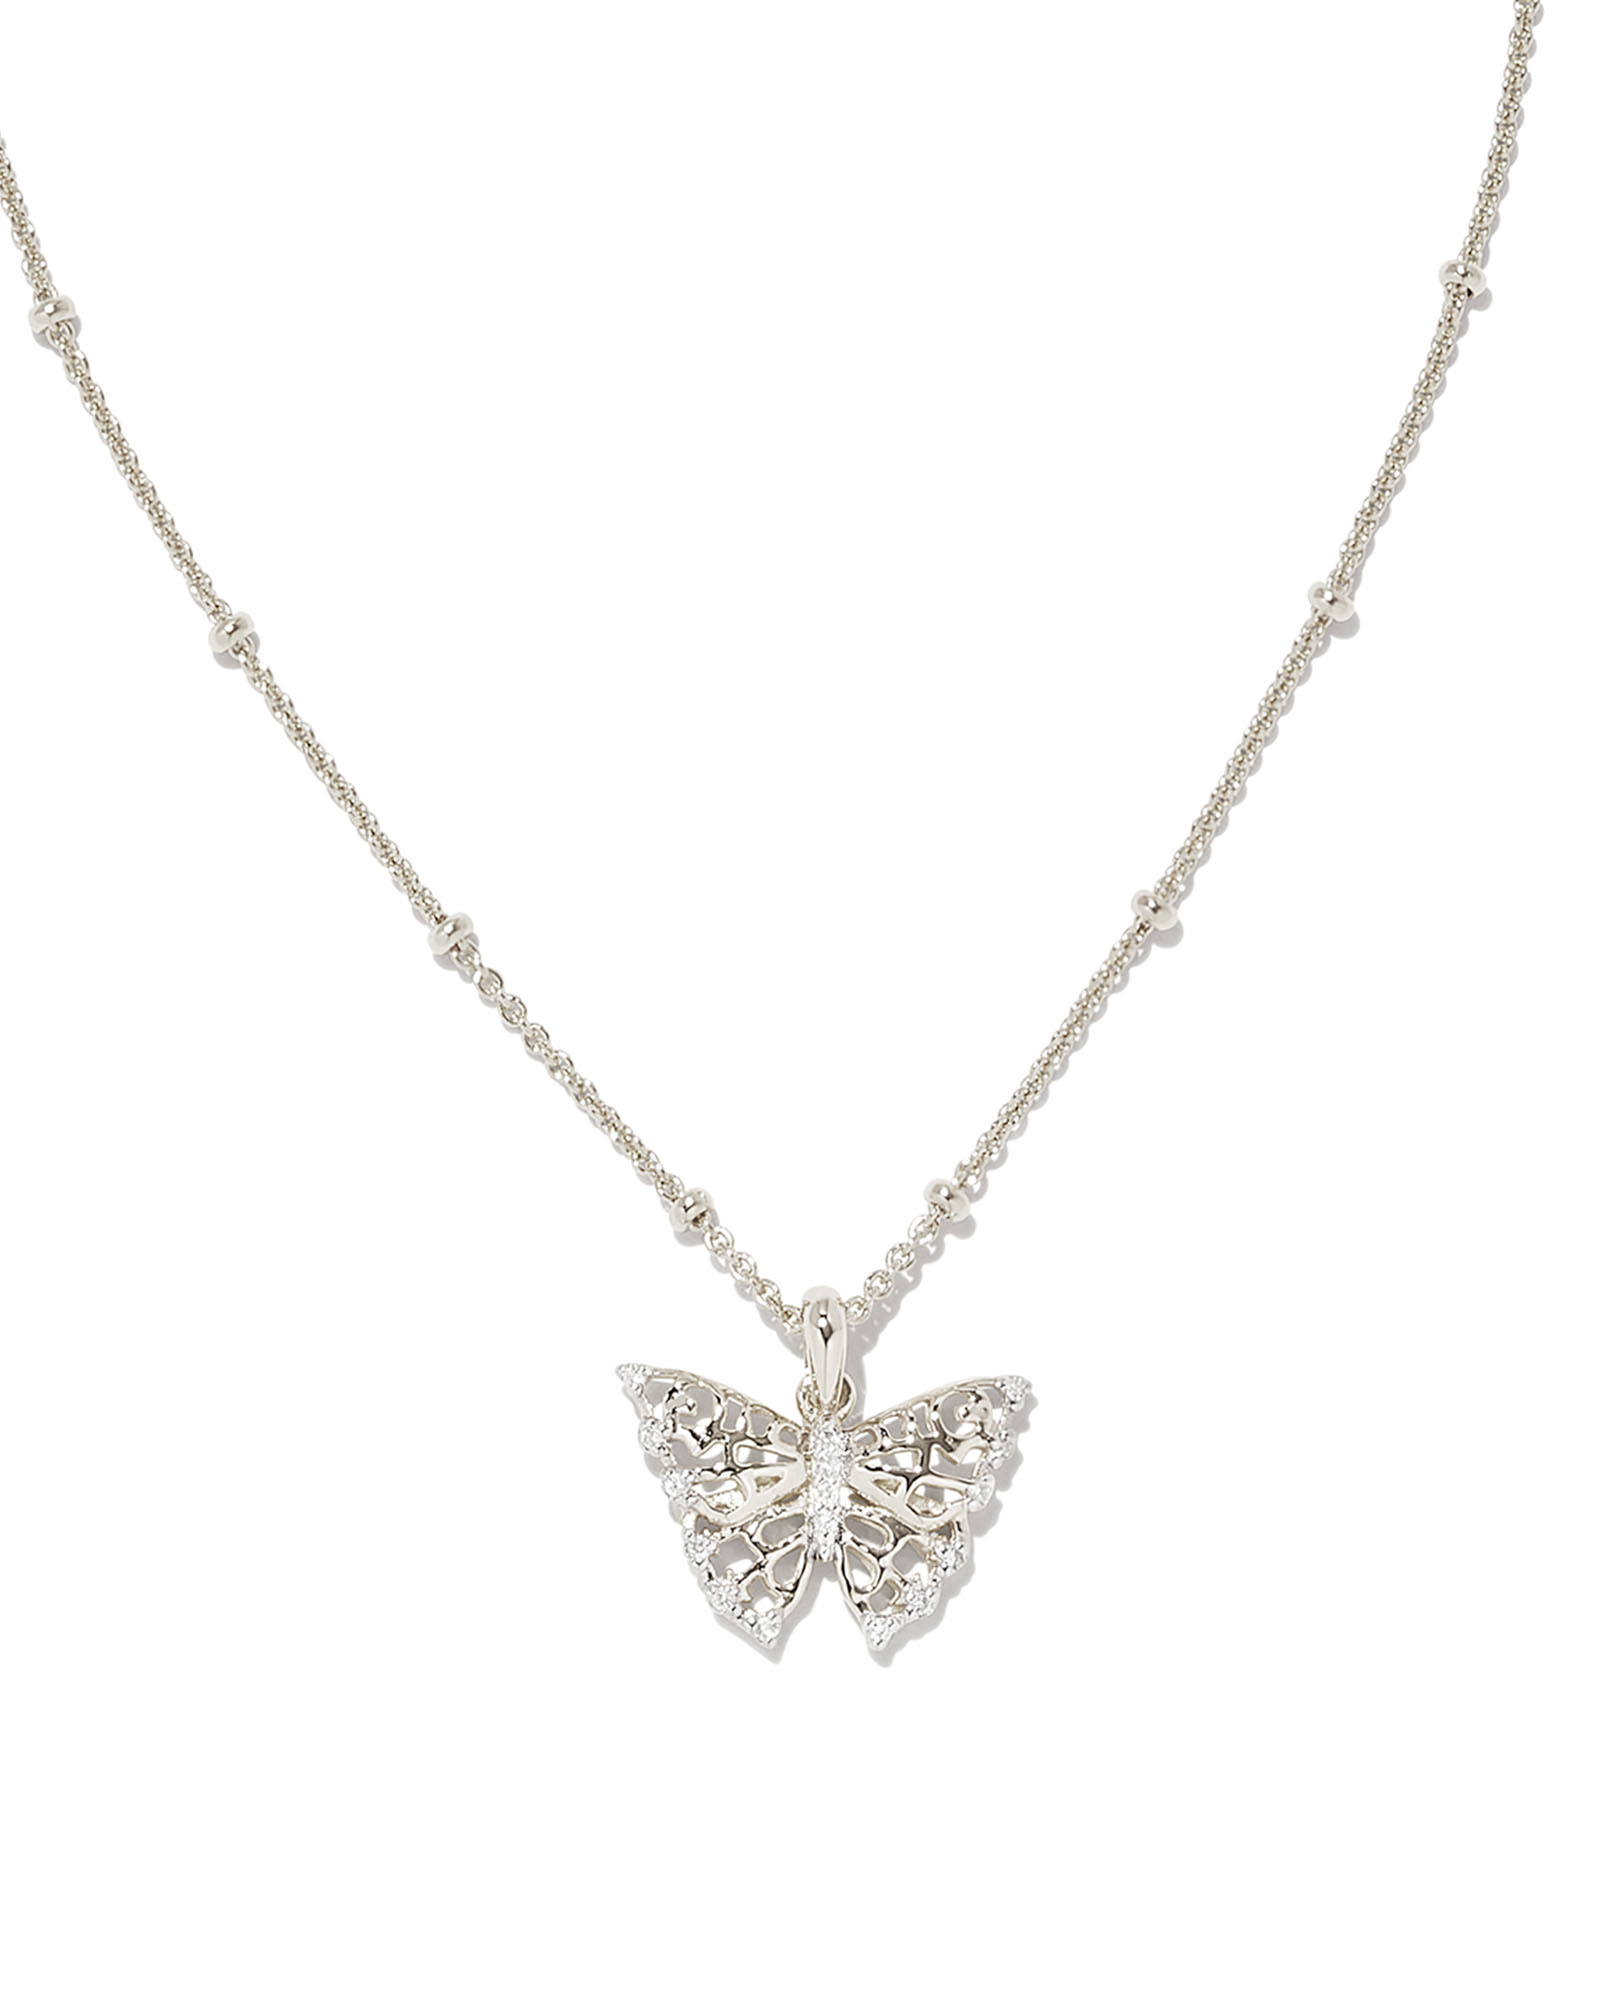 Sterling Silver Butterfly Pendant Necklace, Made in U.S.A. – ArtistGifts